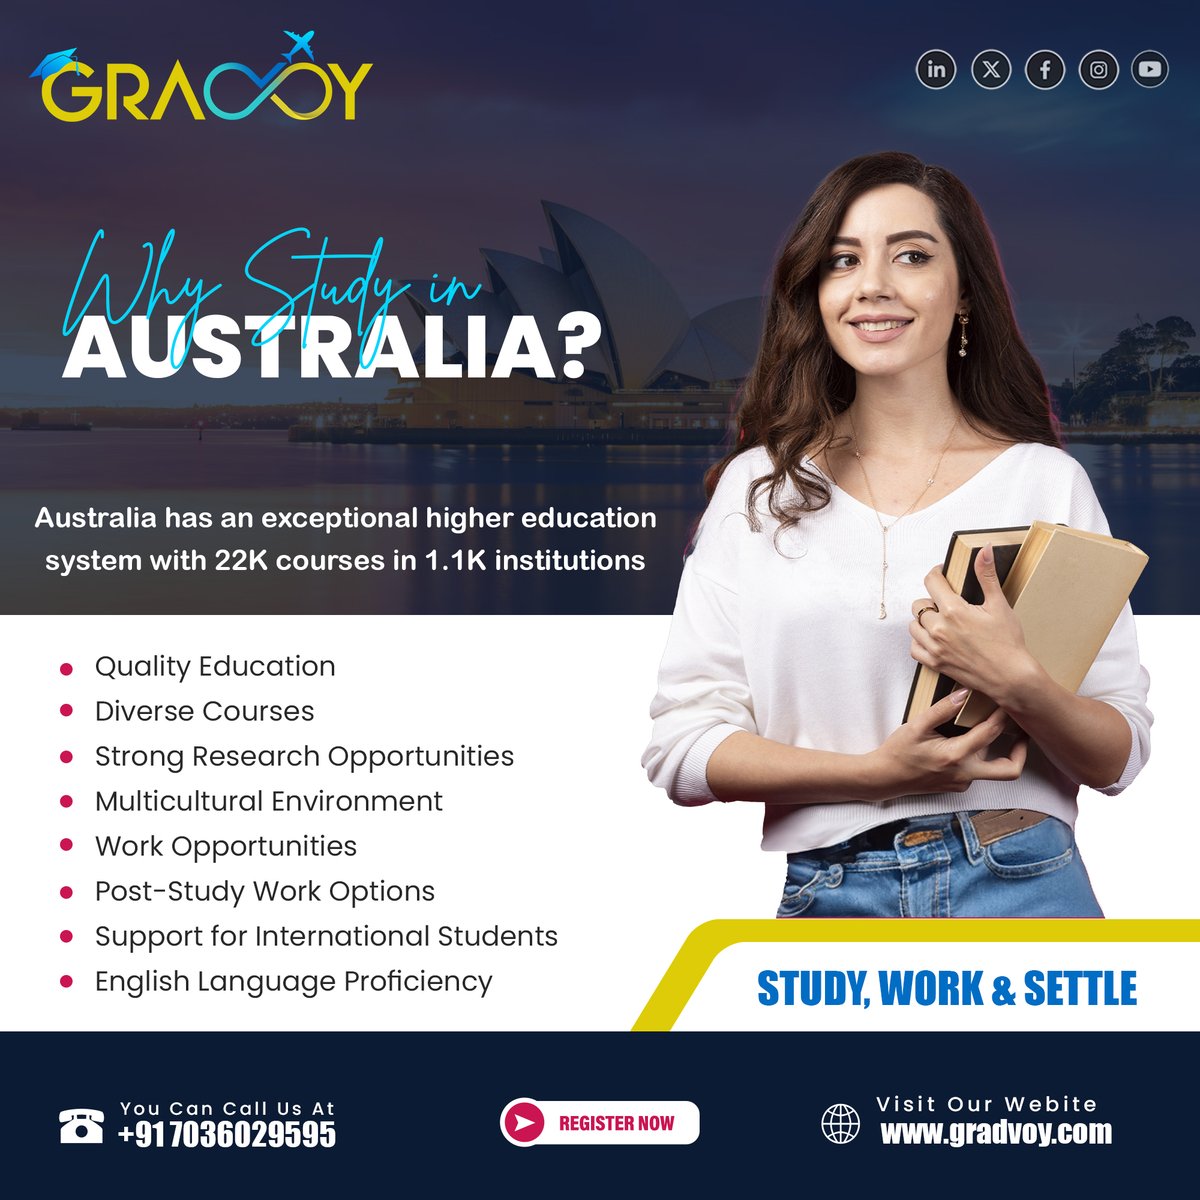 Dreaming of abroad #EducationInAustralia! With a stellar reputation for excellence, Unlock degrees that open doors worldwide, connecting you with global employers and propelling your career. Your future knows no bounds with #Gradvoy and #studyinginaustralia! #Studyabroad